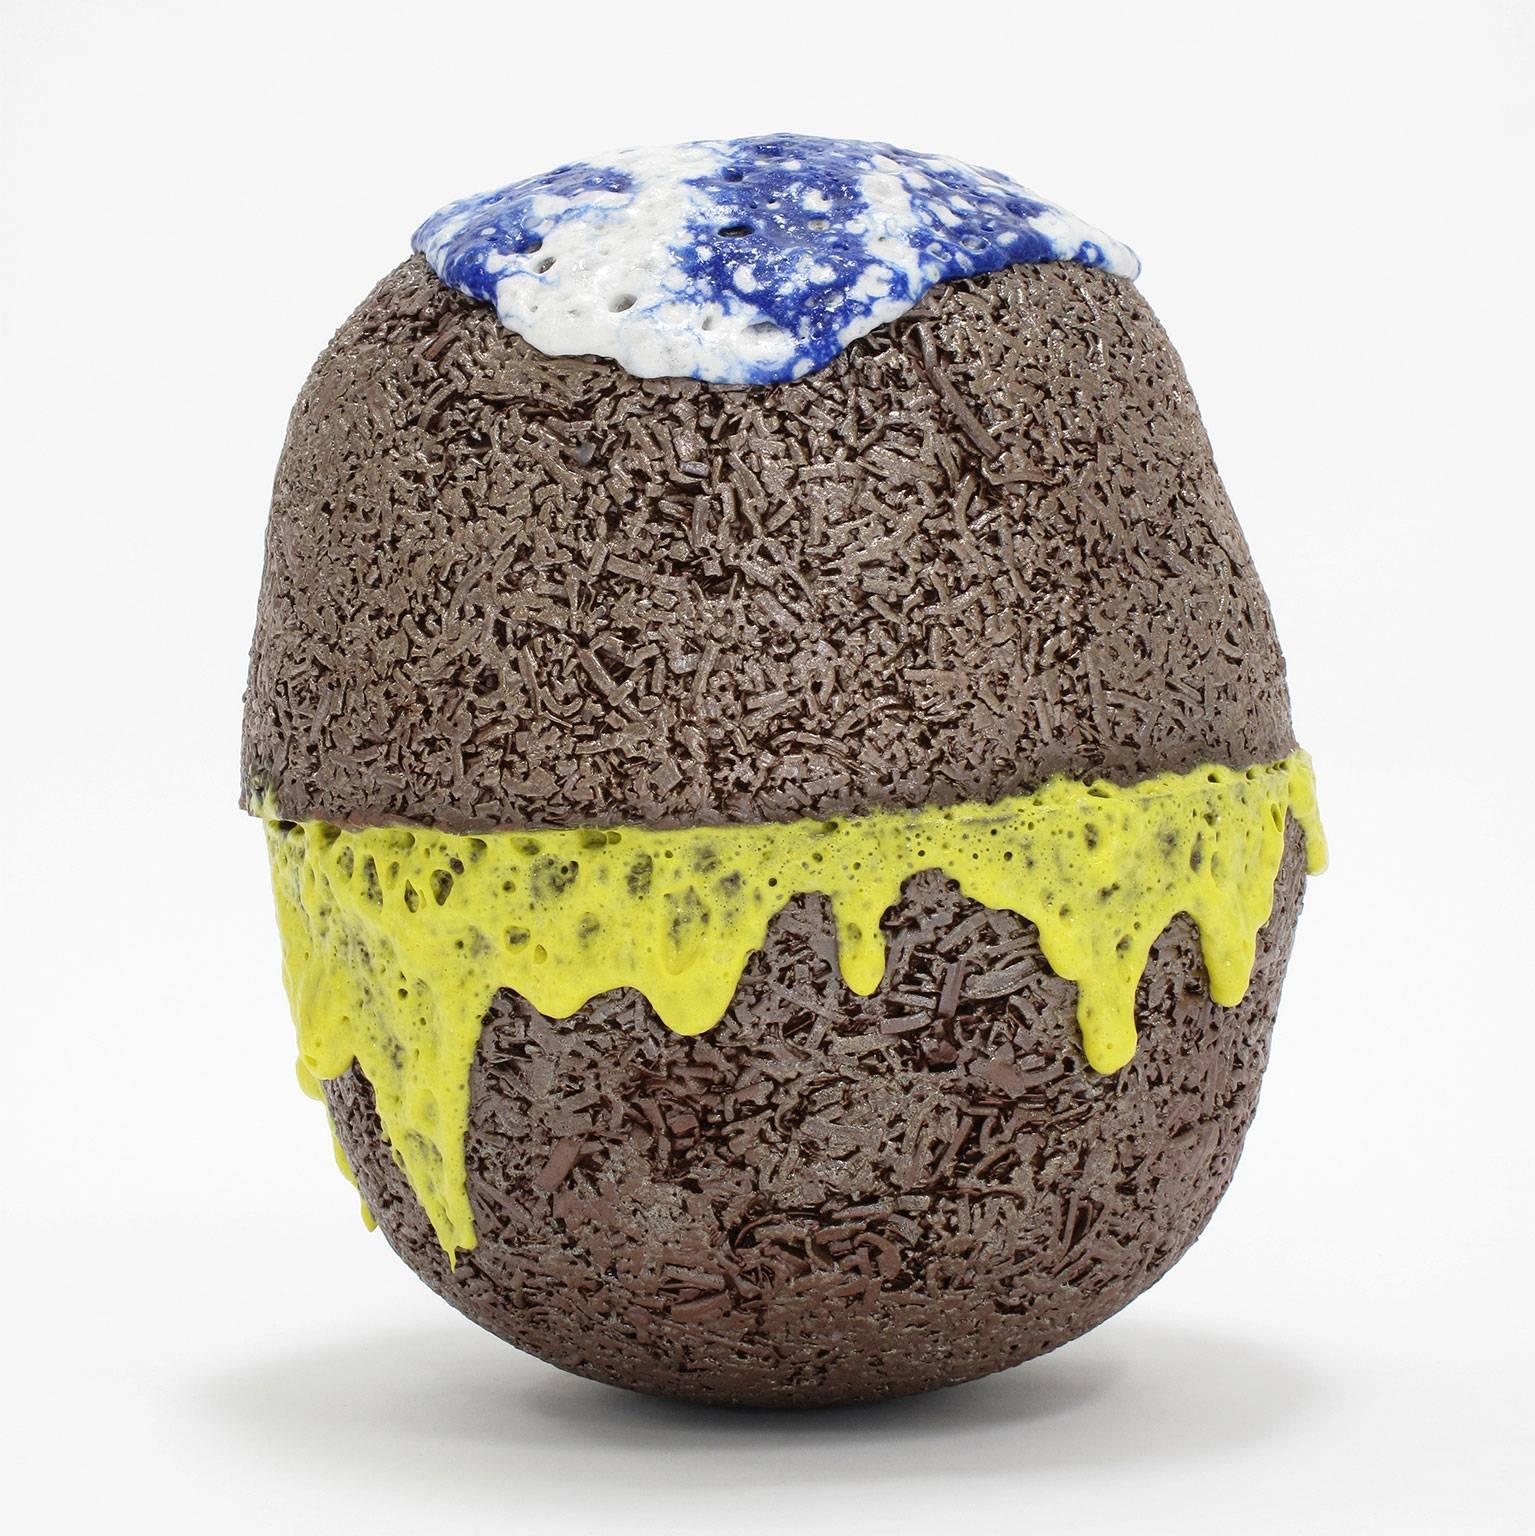 Shoshi Kanokohata
'Delicacy,' 2014
Unique, glazed ceramic sculpture
18 high x 15 diameter inches

Shoshi Kanokohata was born in Tokyo, Japan in 1986. He received an MFA from UCLA in 2014. His work is inspired by the tradition of Japanese